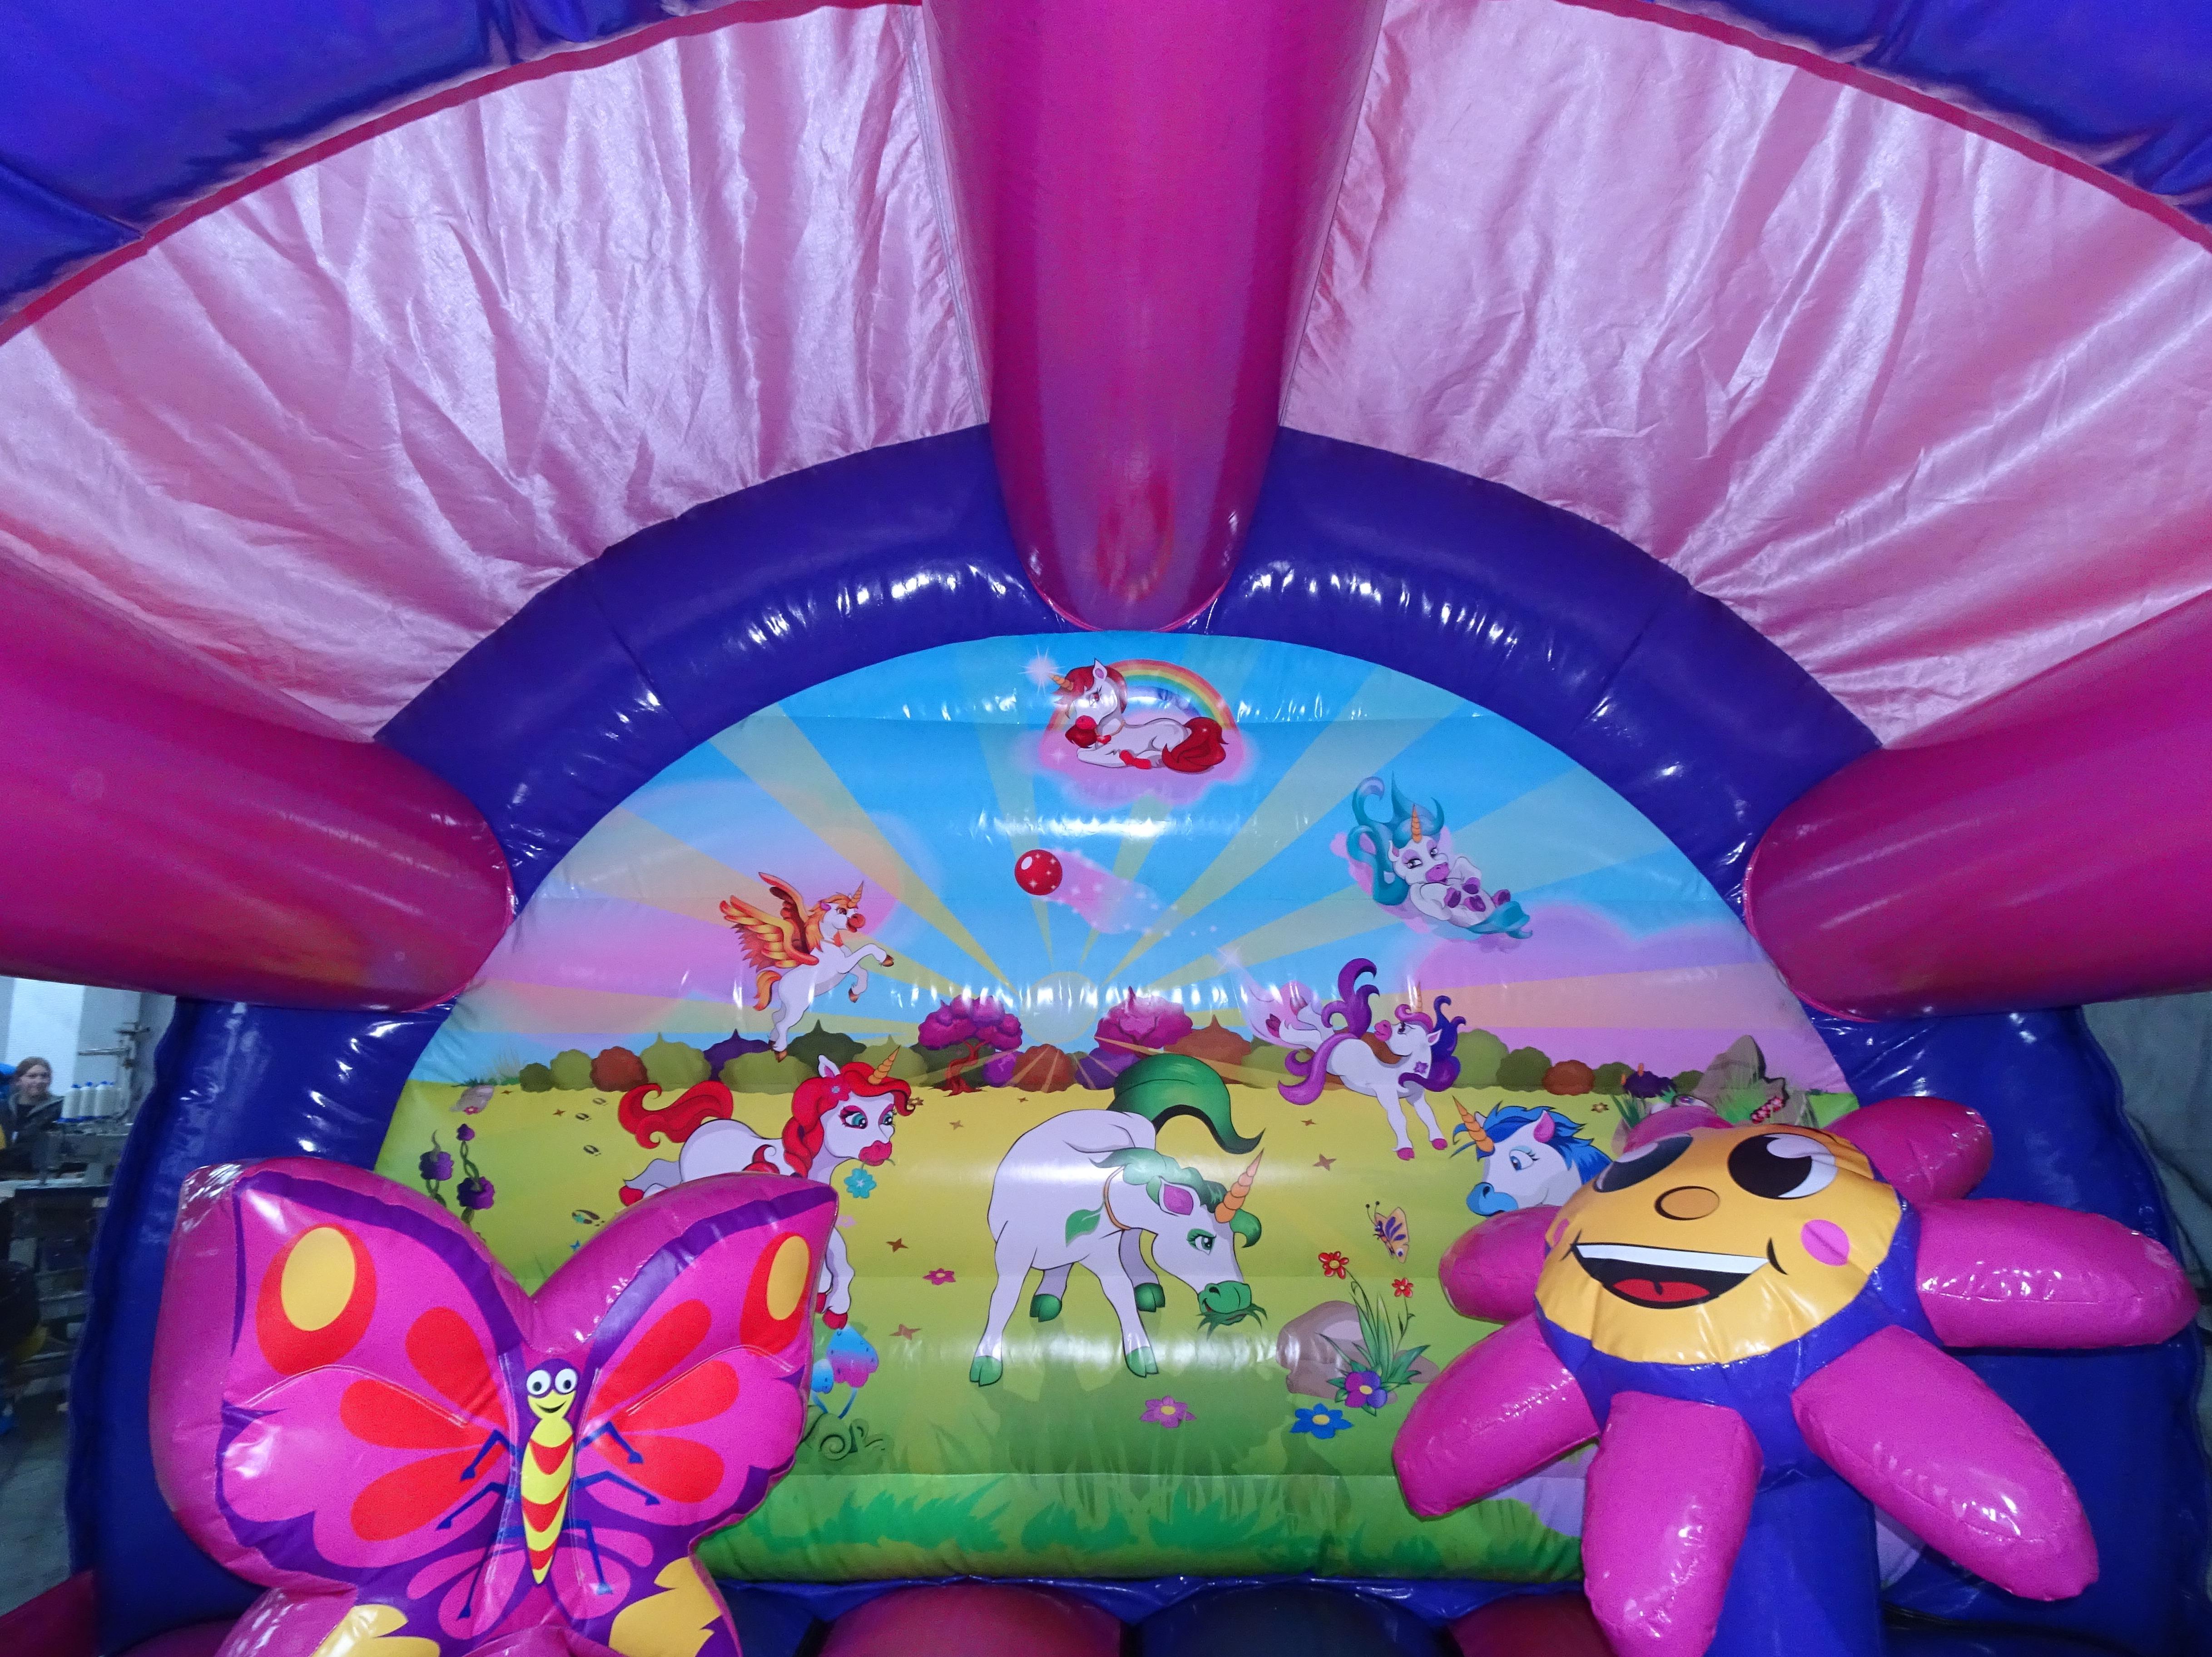 Unicorn Curved Bouncer 1572